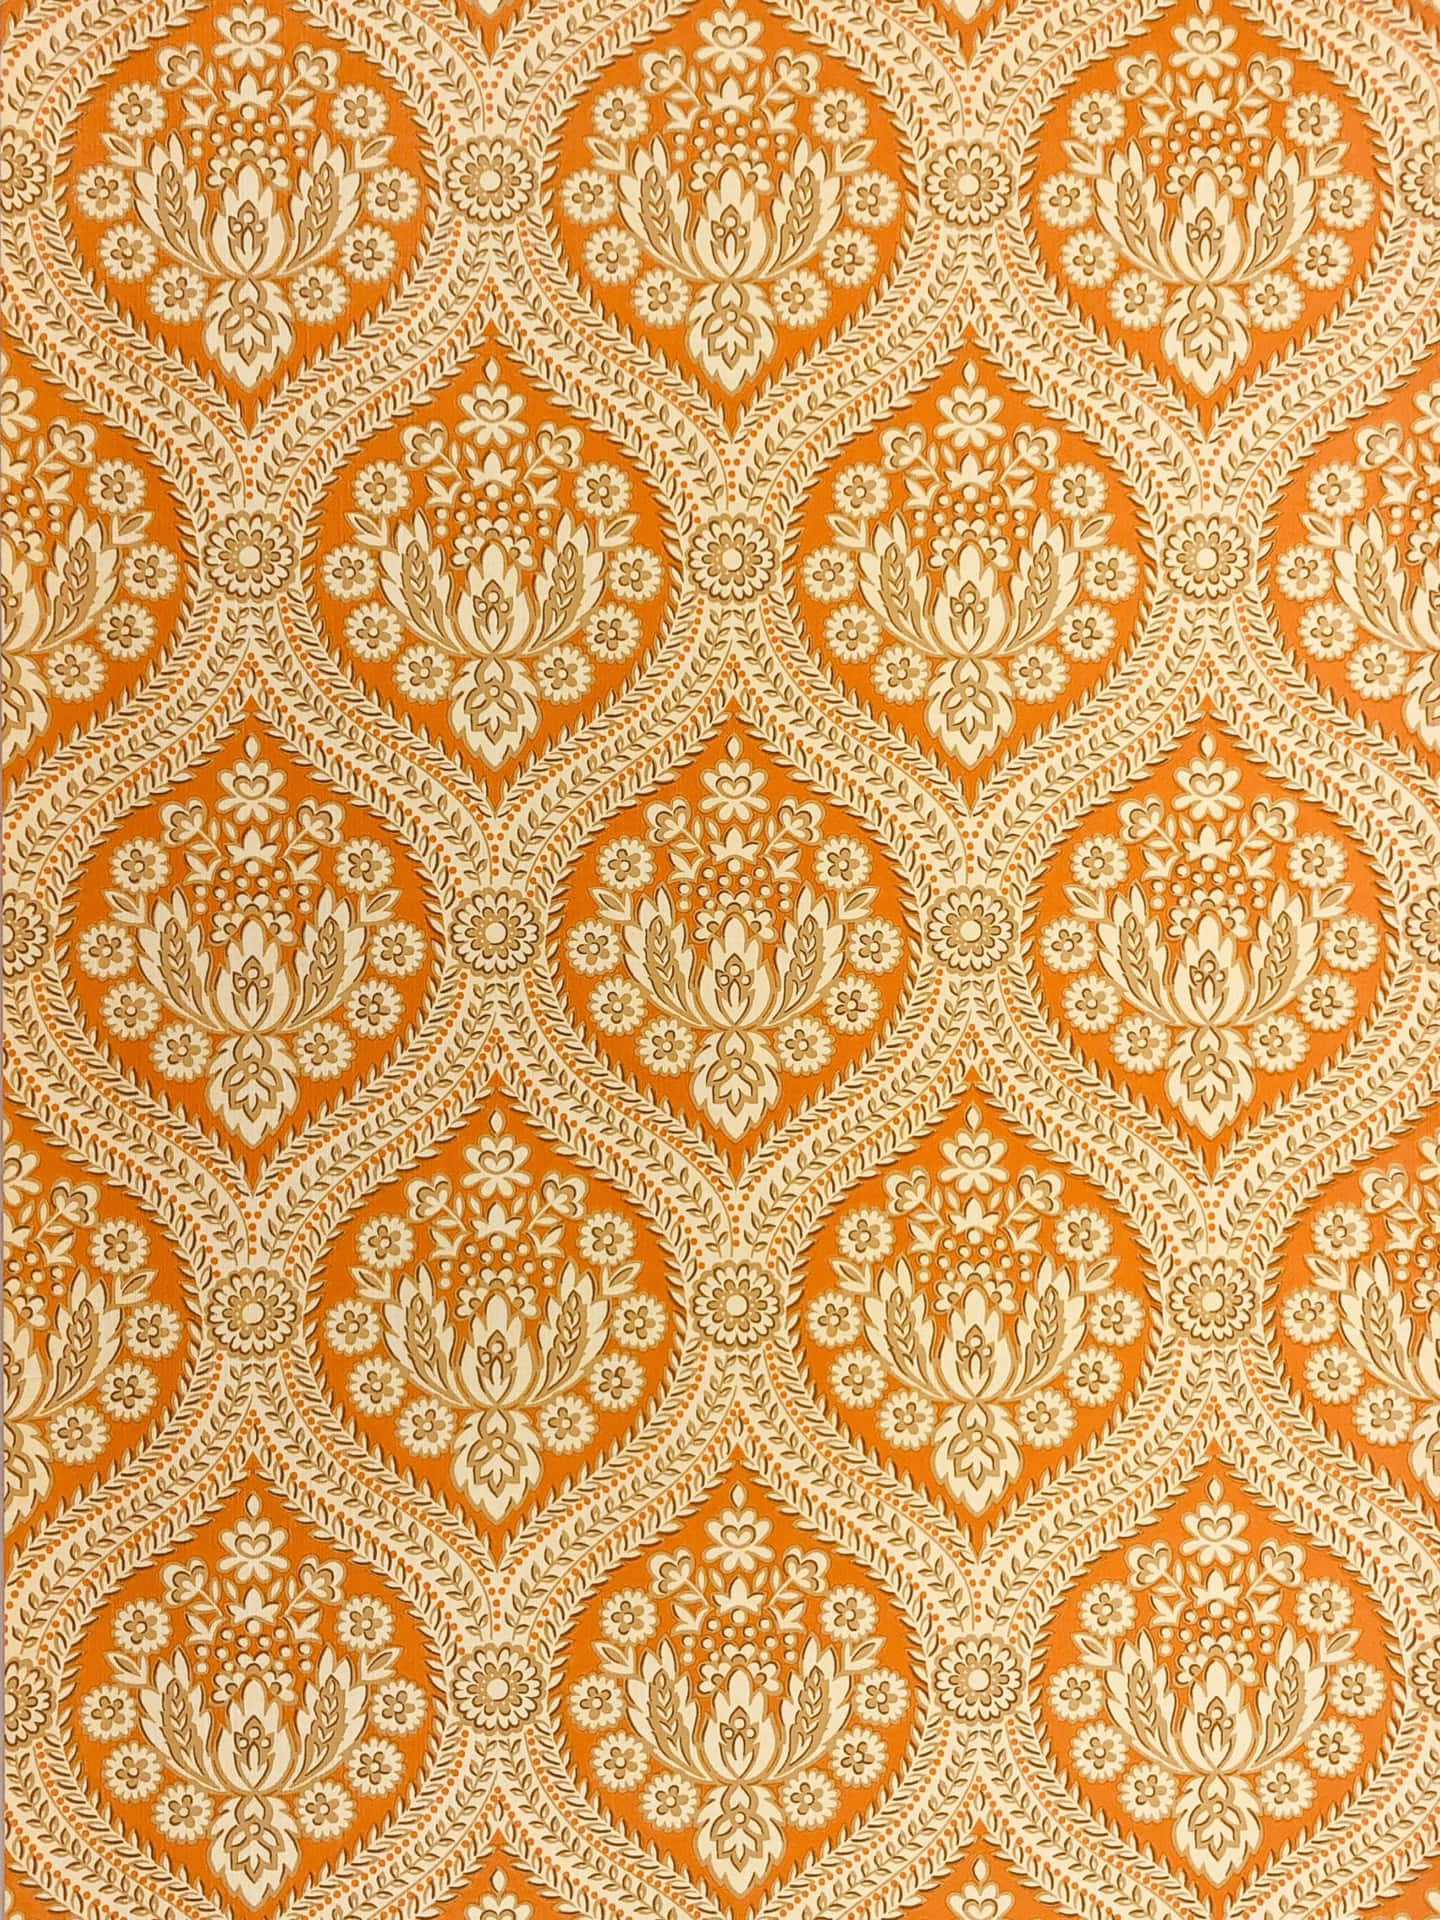 A Wallpaper With An Orange And White Pattern Wallpaper